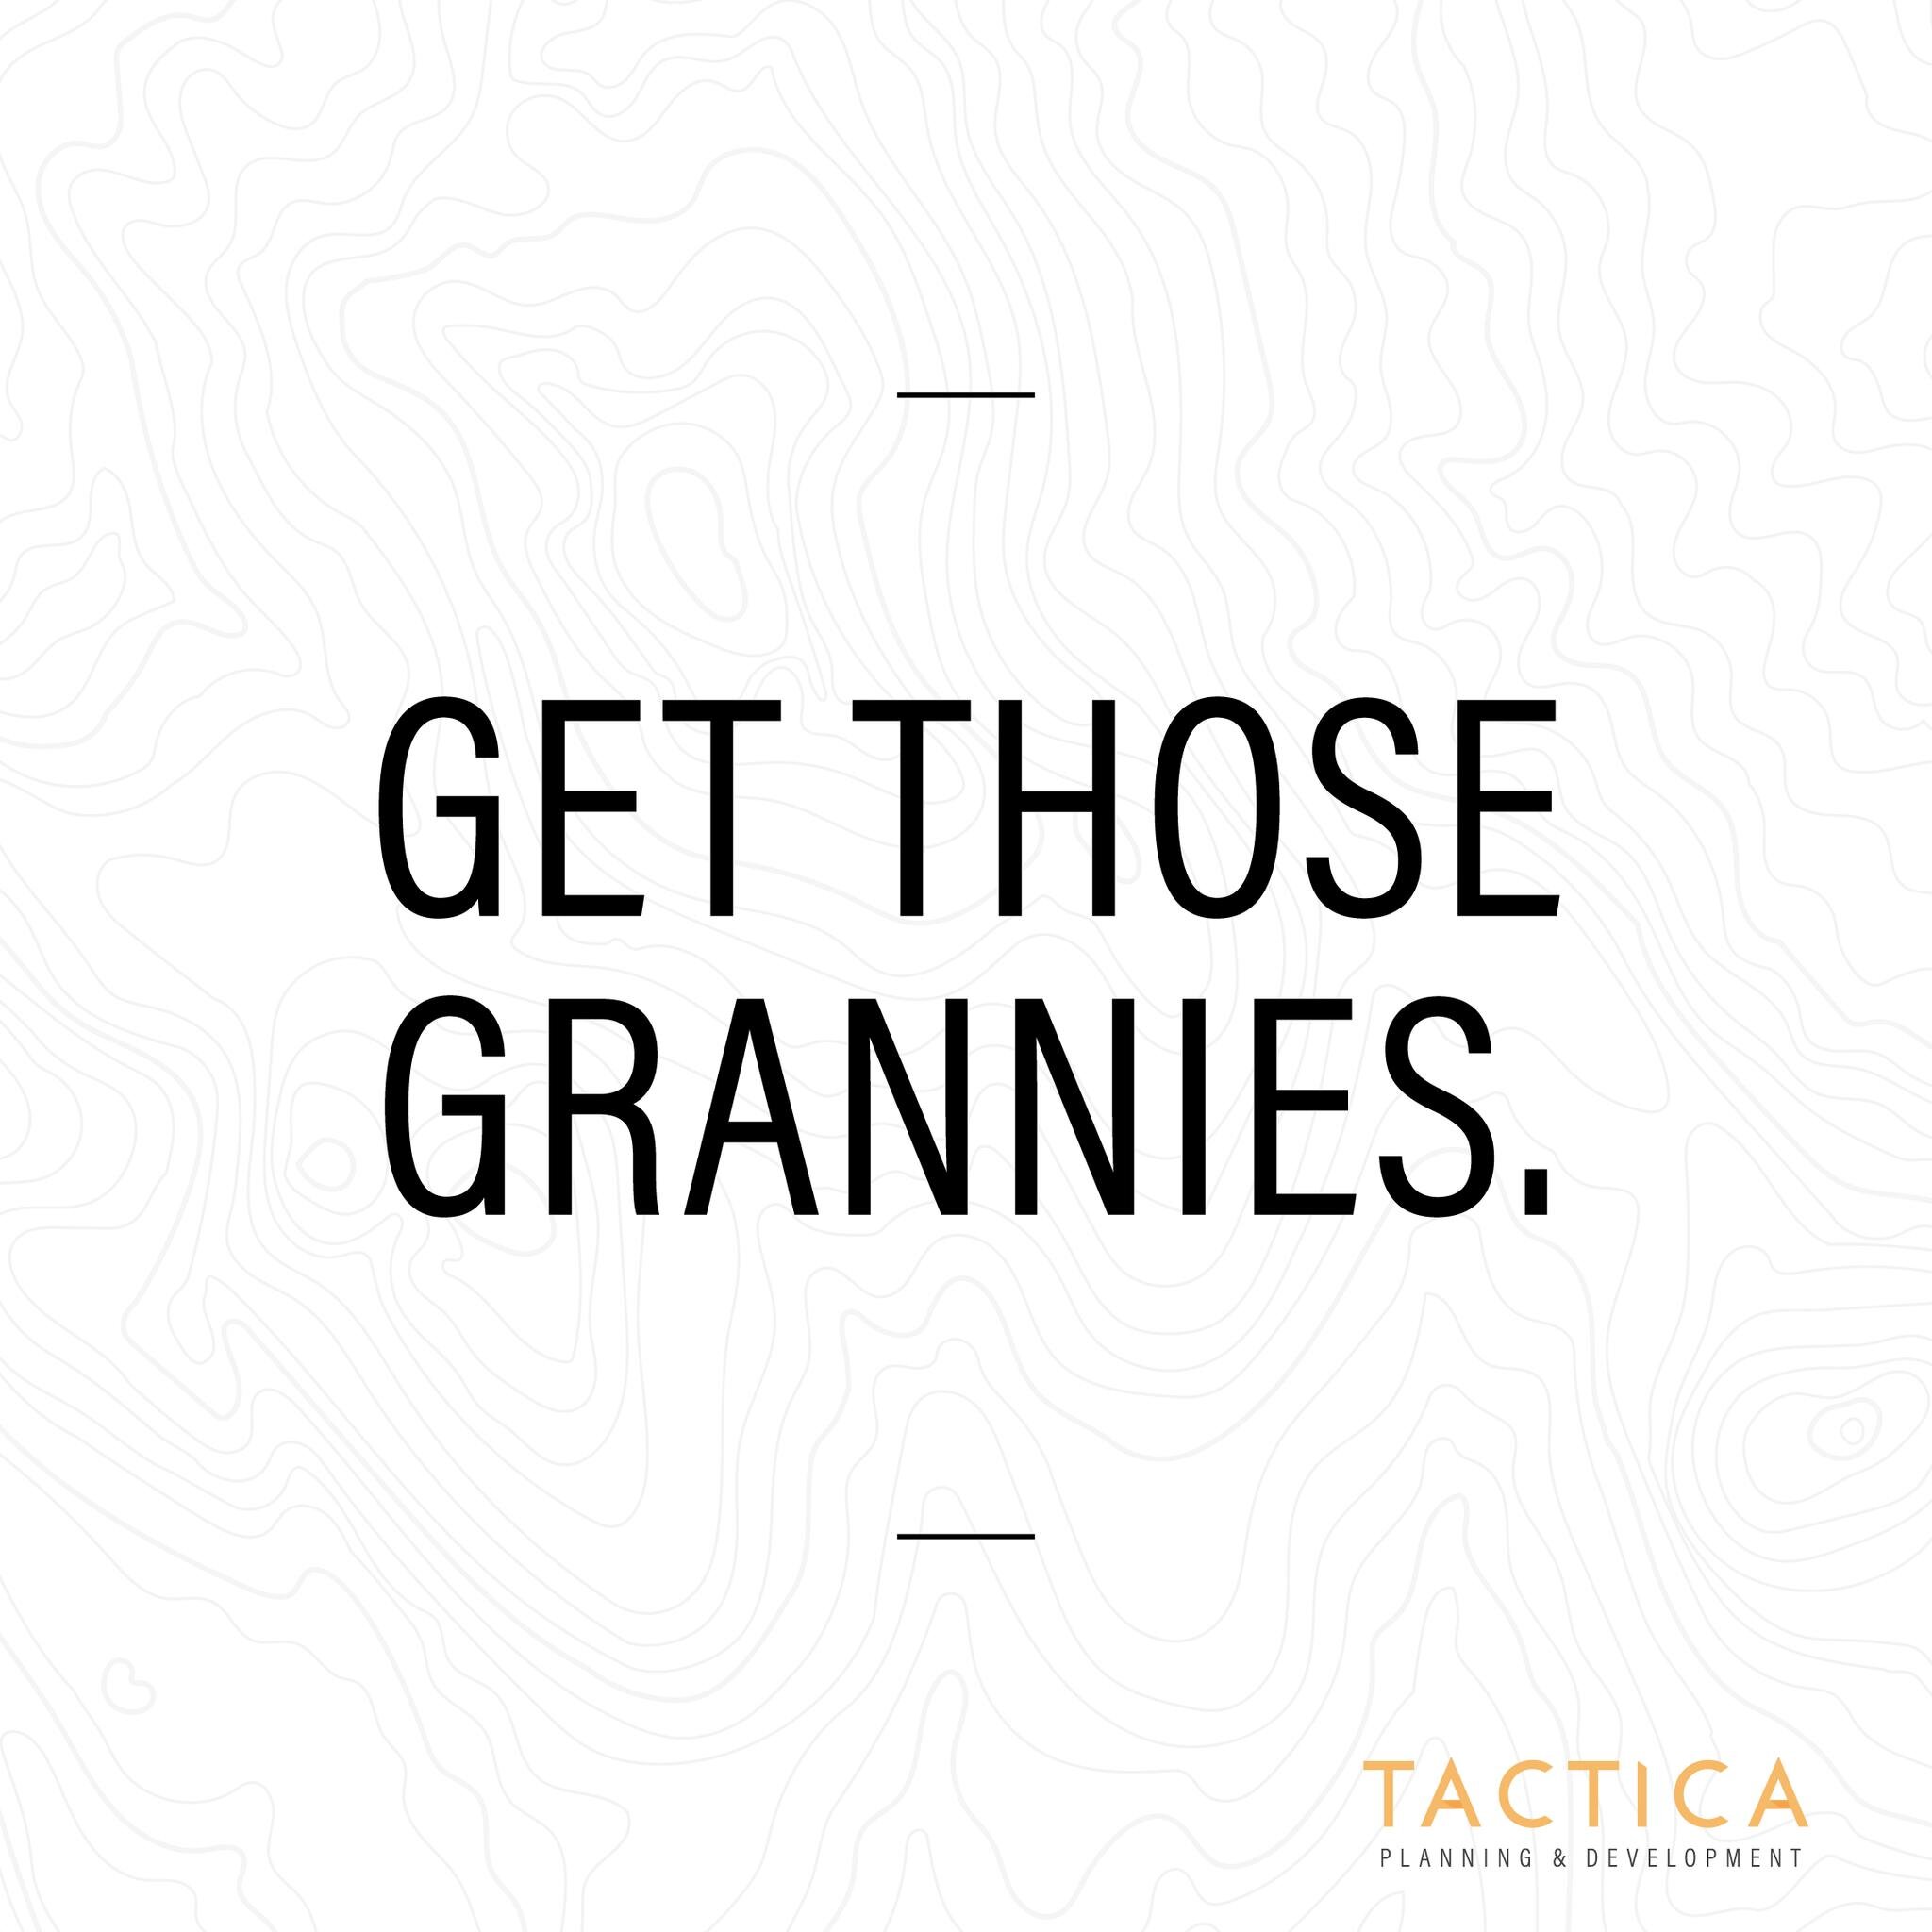 Why you should consider building a granny flat on your property &ndash; link to blog. https://www.tacticaplan.com.au/blog/building-a-granny-flat-on-your-property 
.
#grannyflat #tacticaplan #planning #goldcoast #tacticaplanning&amp;development #townp